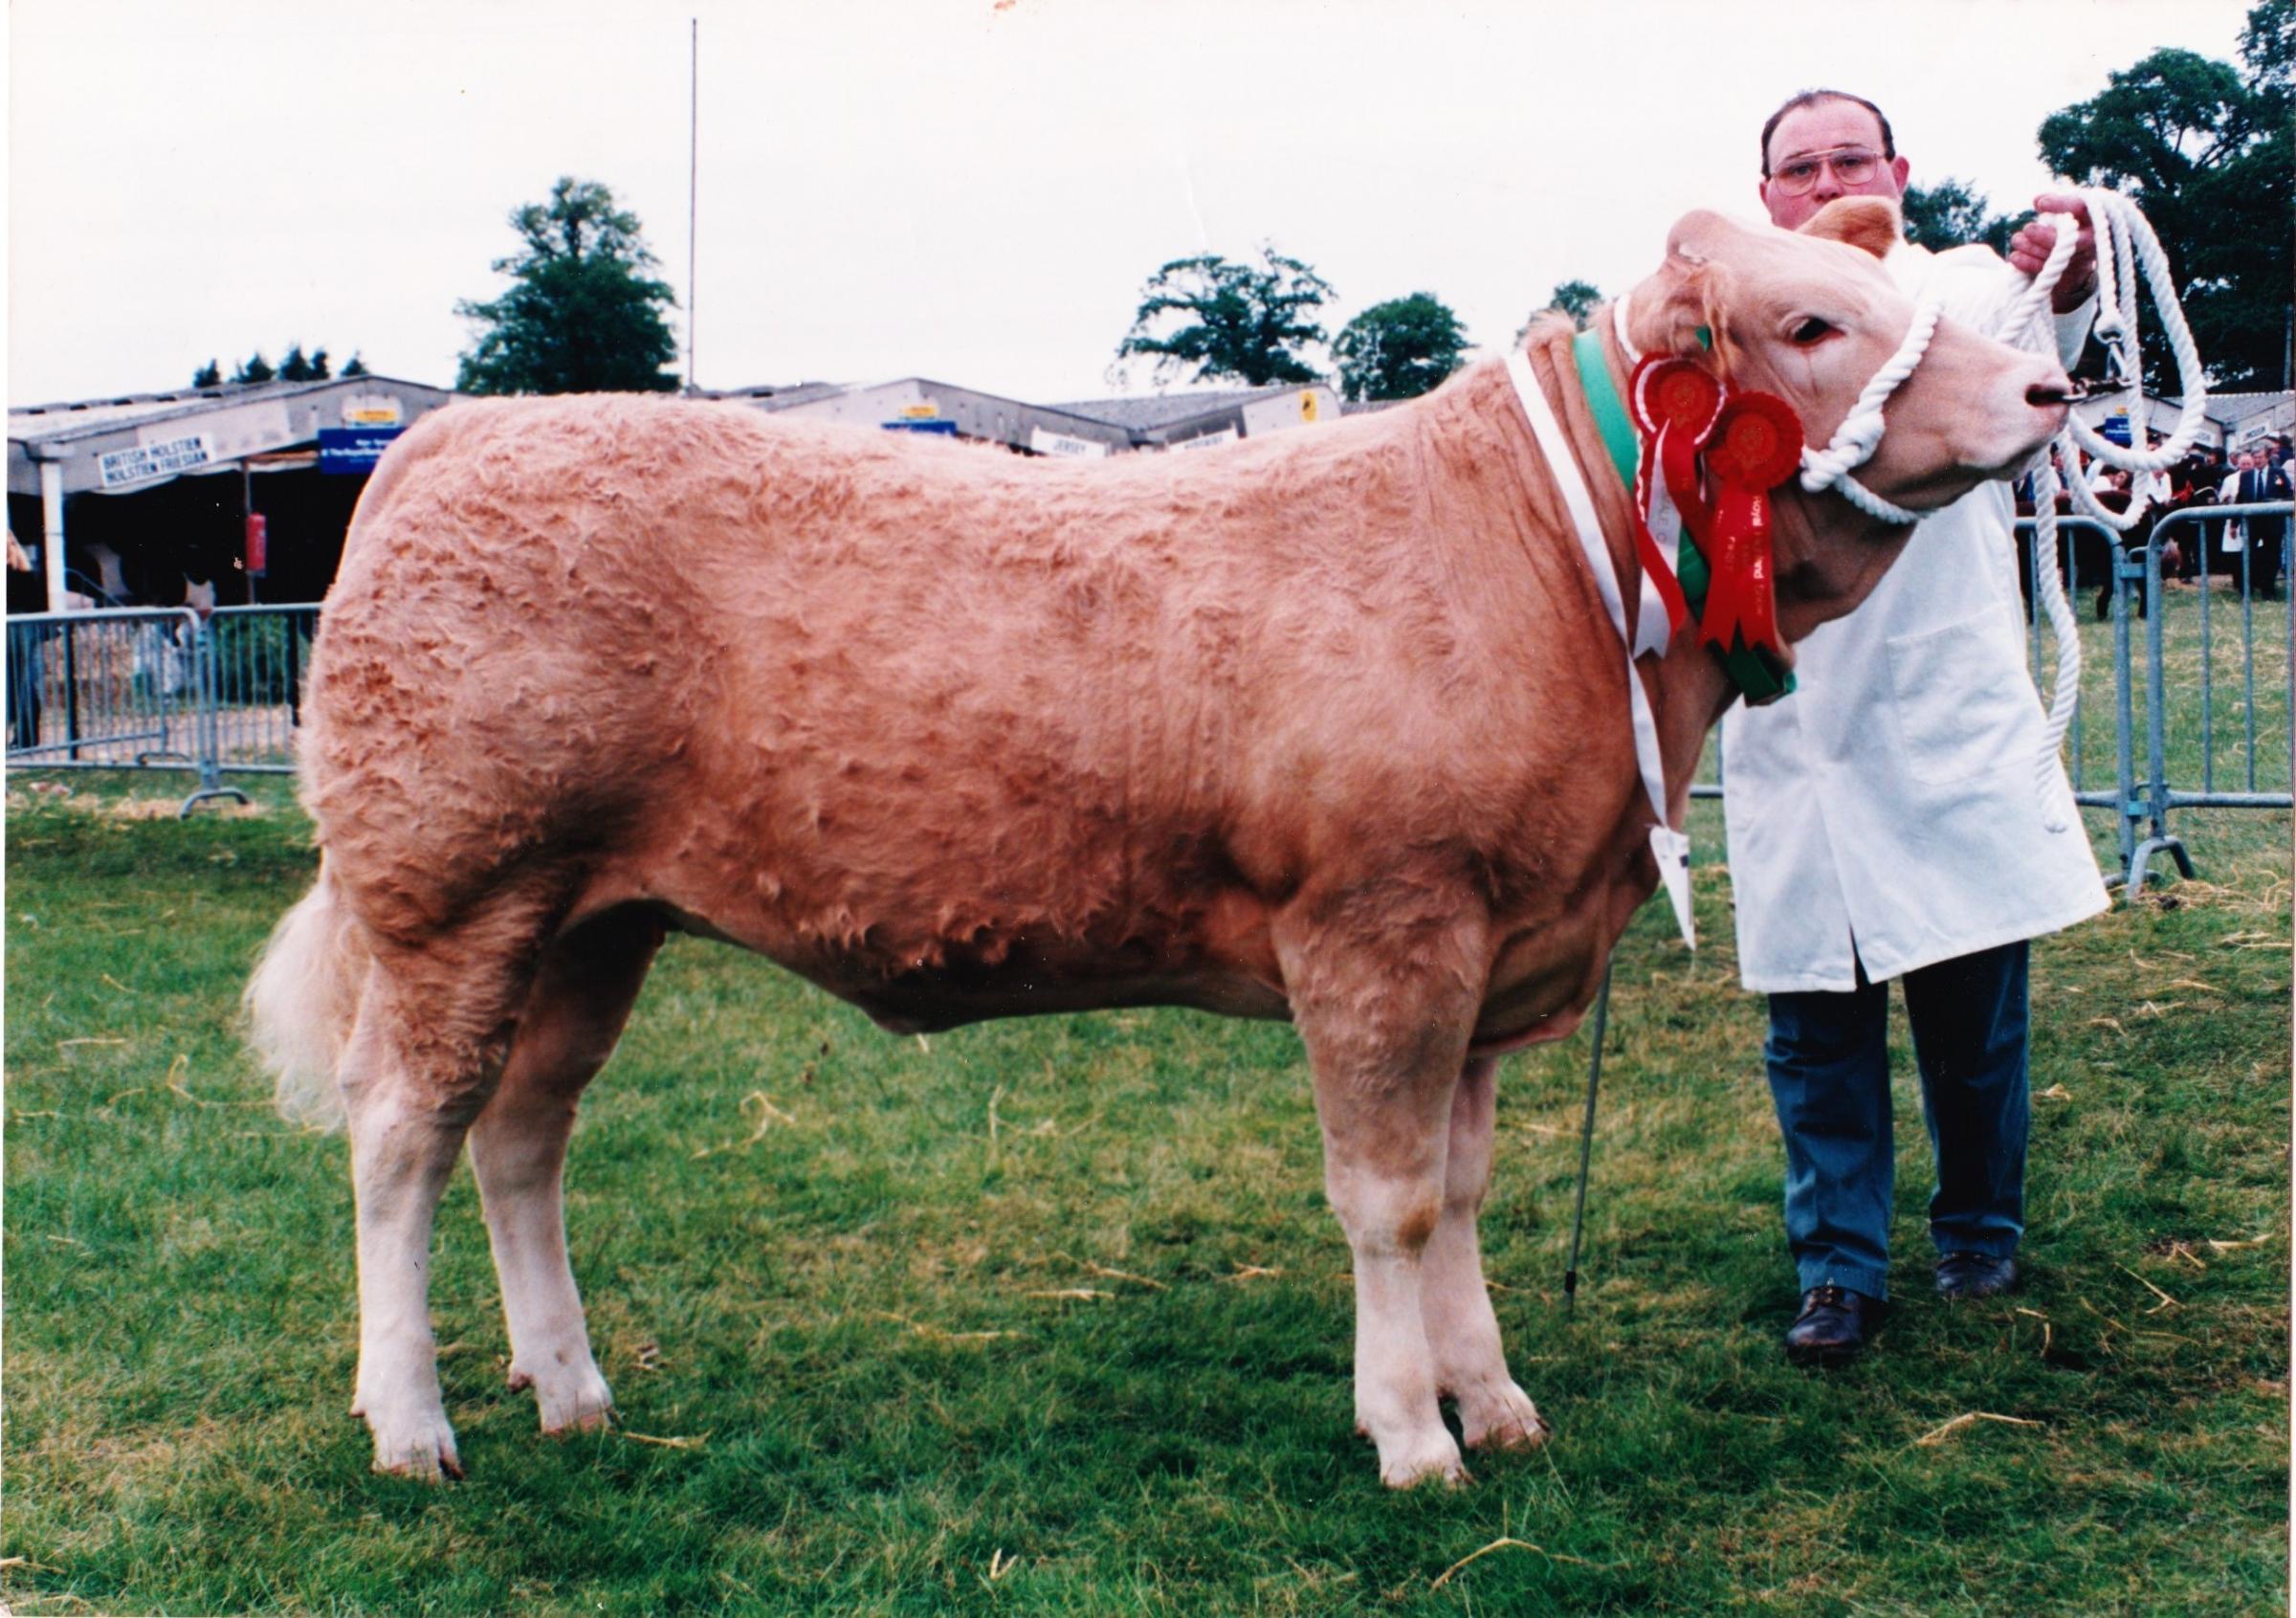 Royal Highland Show commercial cattle champion in 1994 with this Charolais cross heifer, Miss Solitaire was Georges greatest achievement 